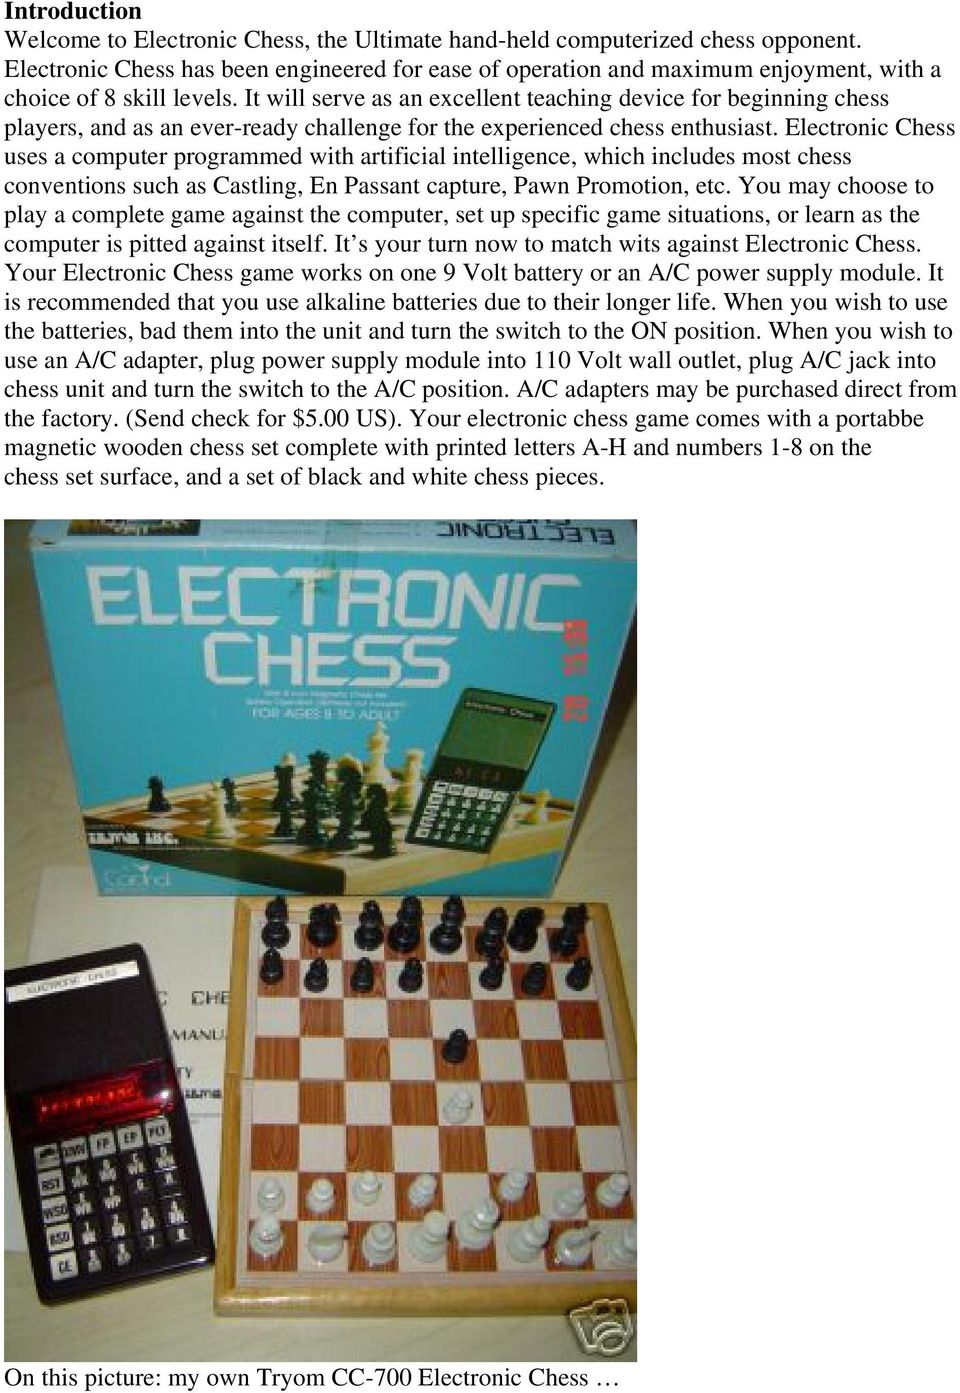 It will serve as an excellent teaching device for beginning chess players, and as an ever-ready challenge for the experienced chess enthusiast.